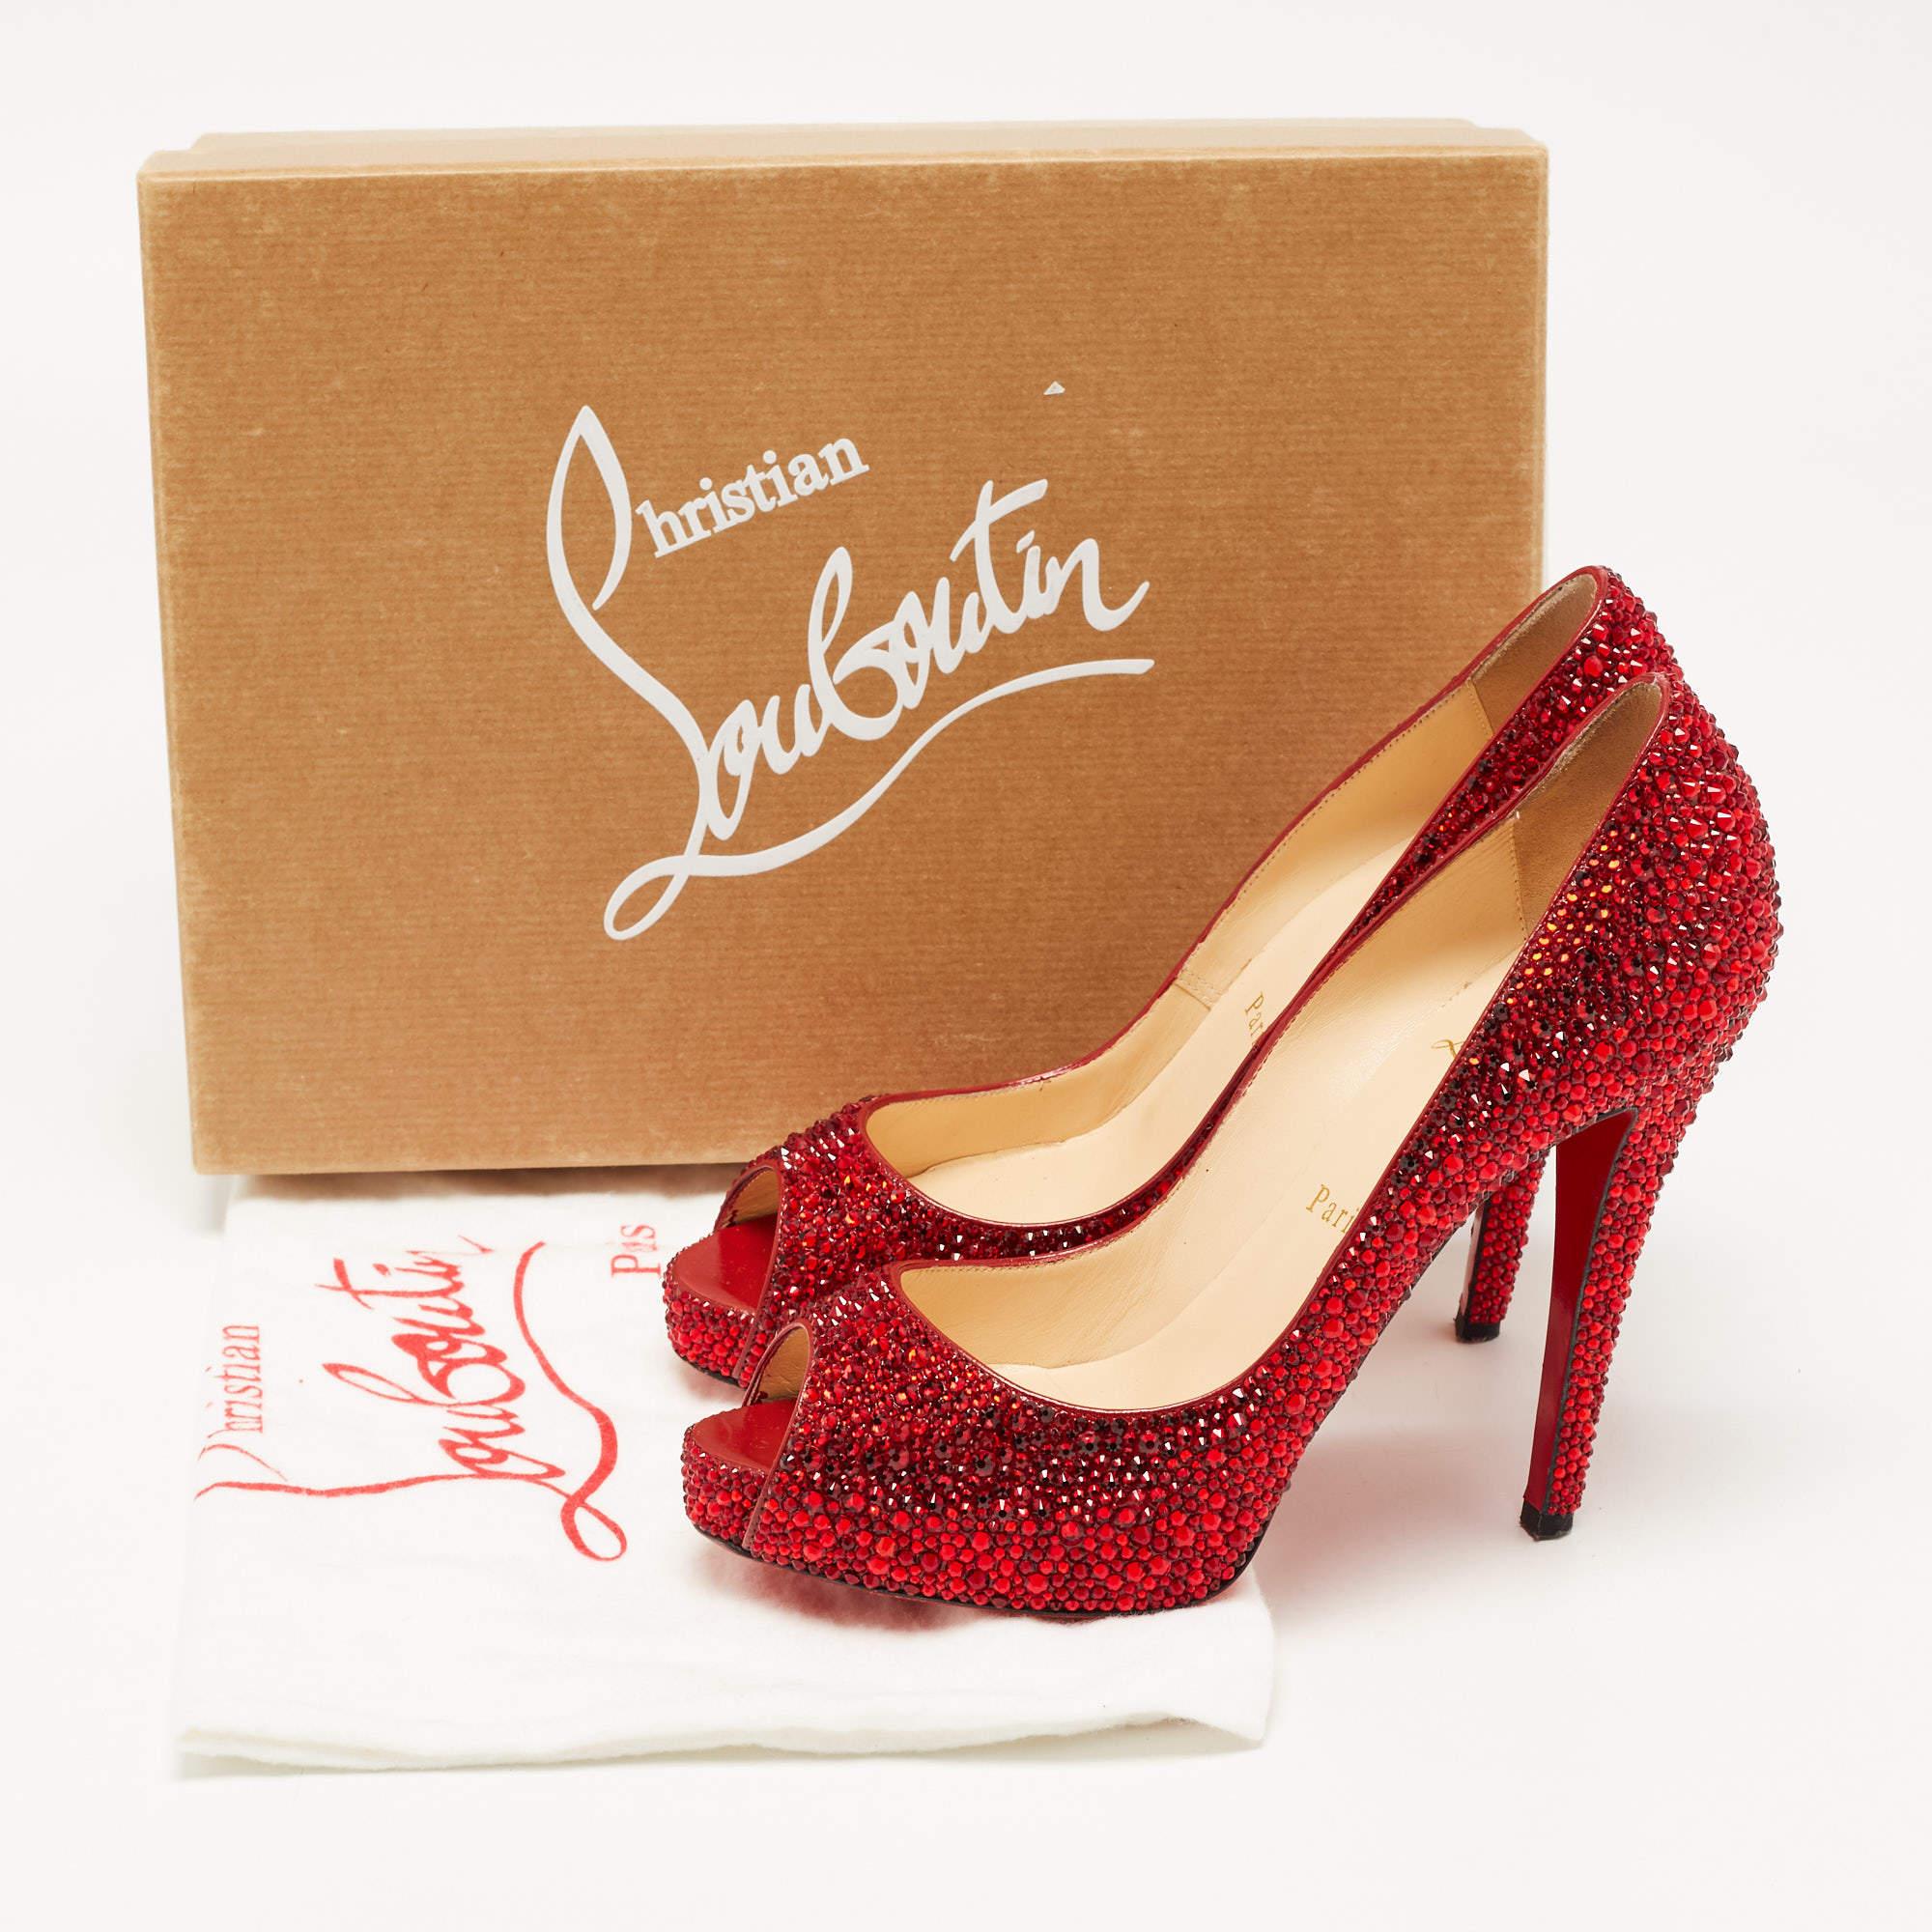 Christian Louboutin Red Leather Strass Very Prive Pumps Size 37.5 For Sale 5